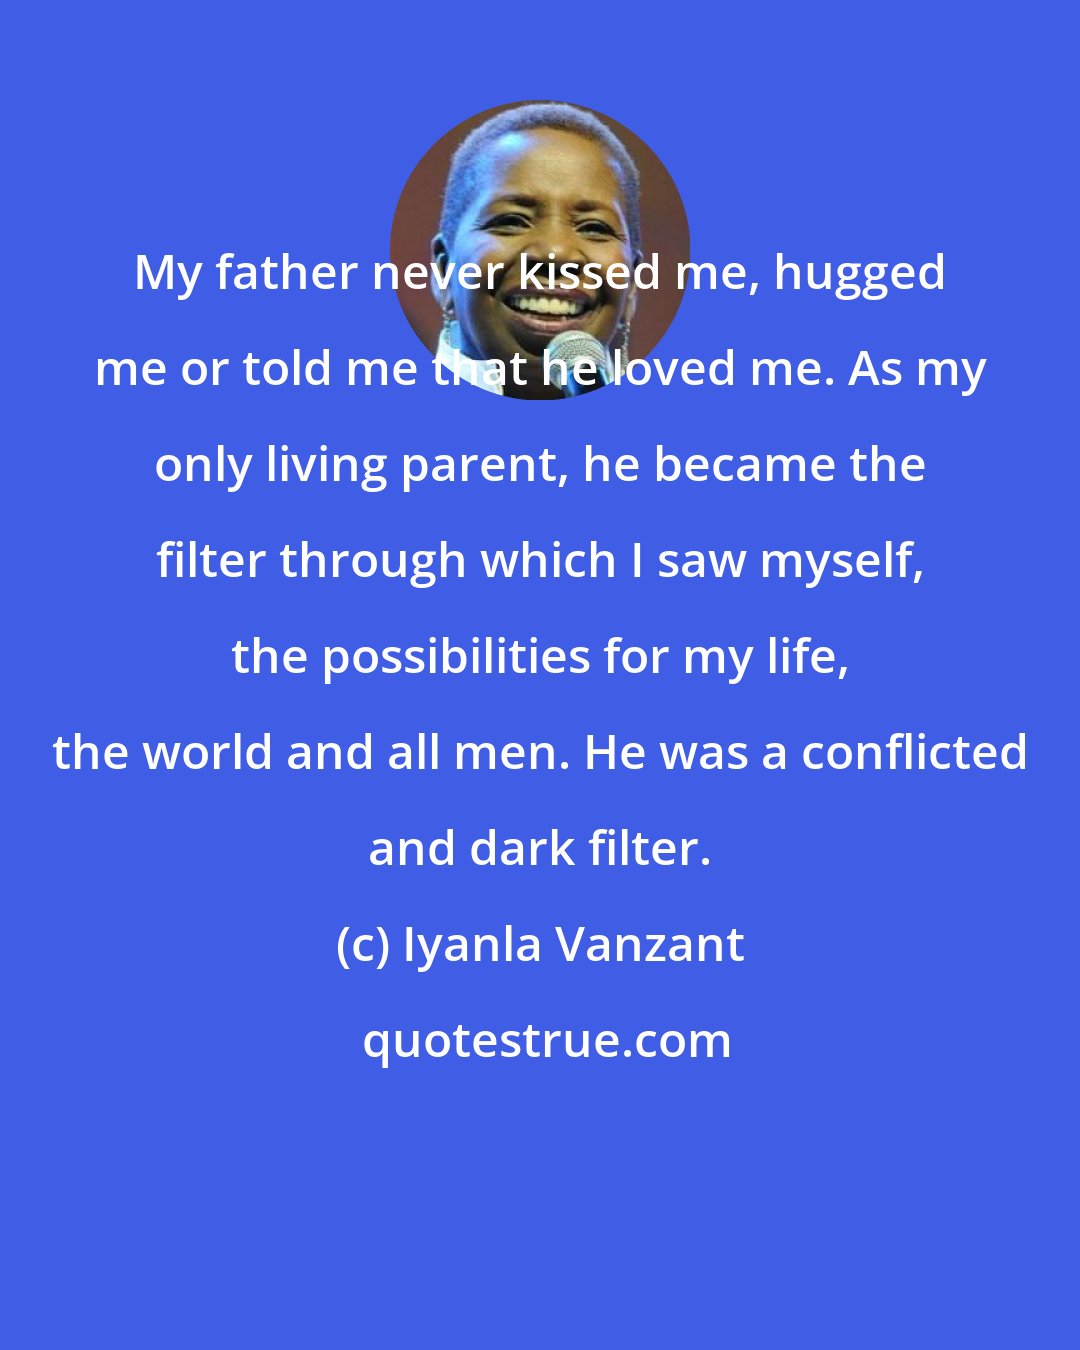 Iyanla Vanzant: My father never kissed me, hugged me or told me that he loved me. As my only living parent, he became the filter through which I saw myself, the possibilities for my life, the world and all men. He was a conflicted and dark filter.